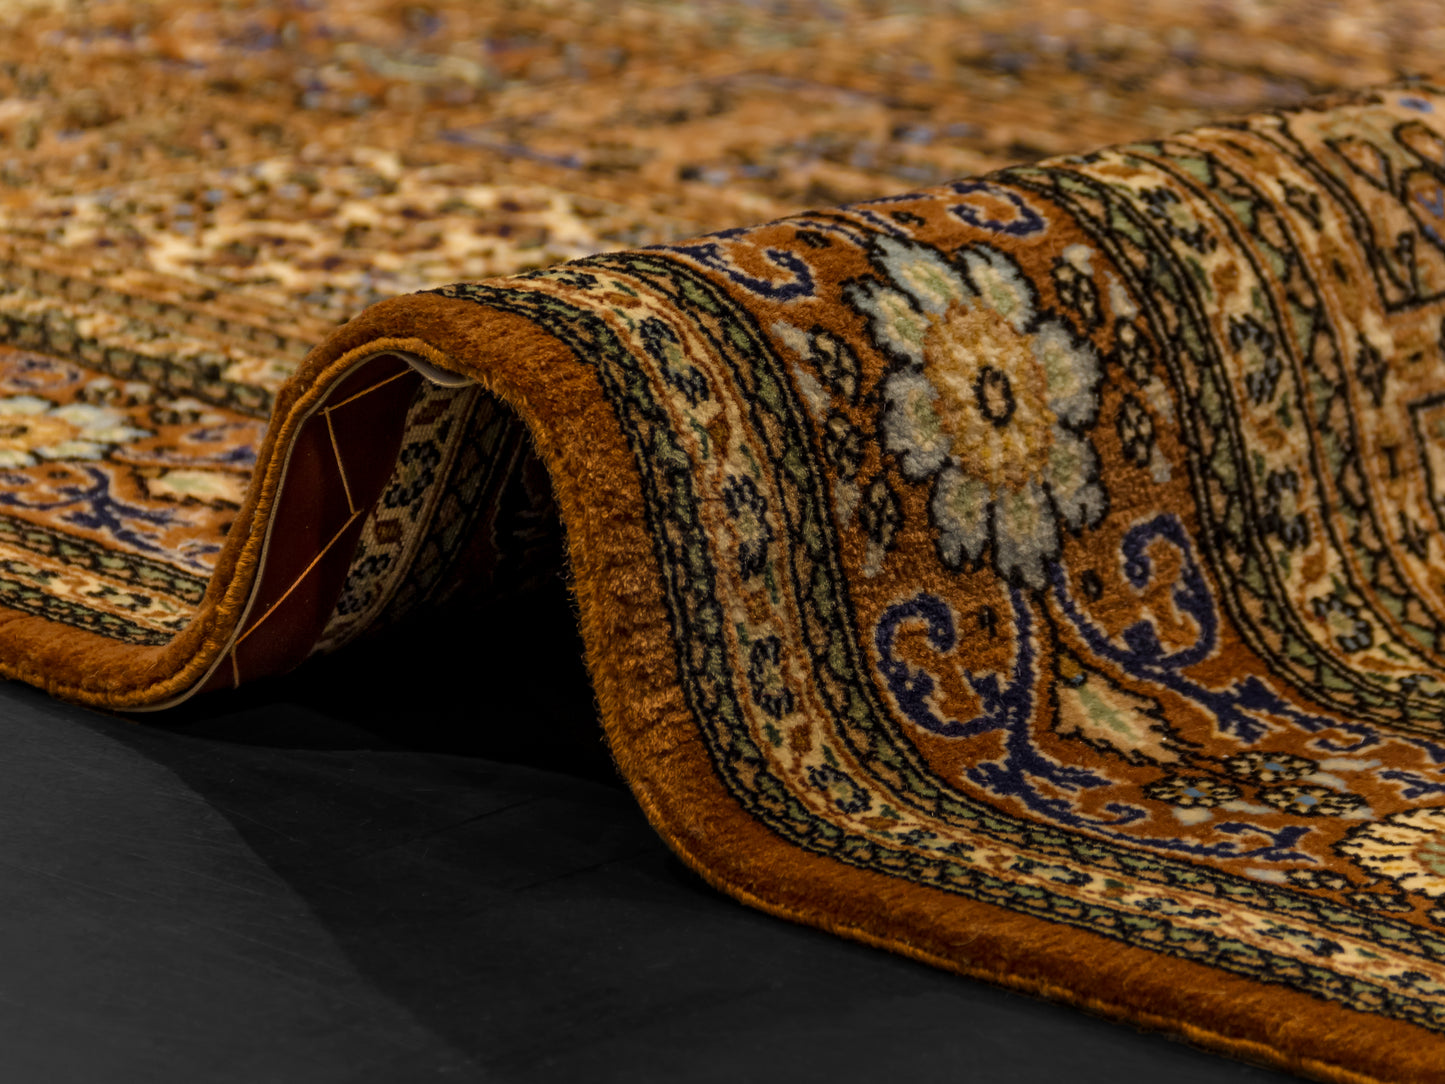 Hand-knotted Persian Wool Brown Rug "4 seasons" product image #29703128481962